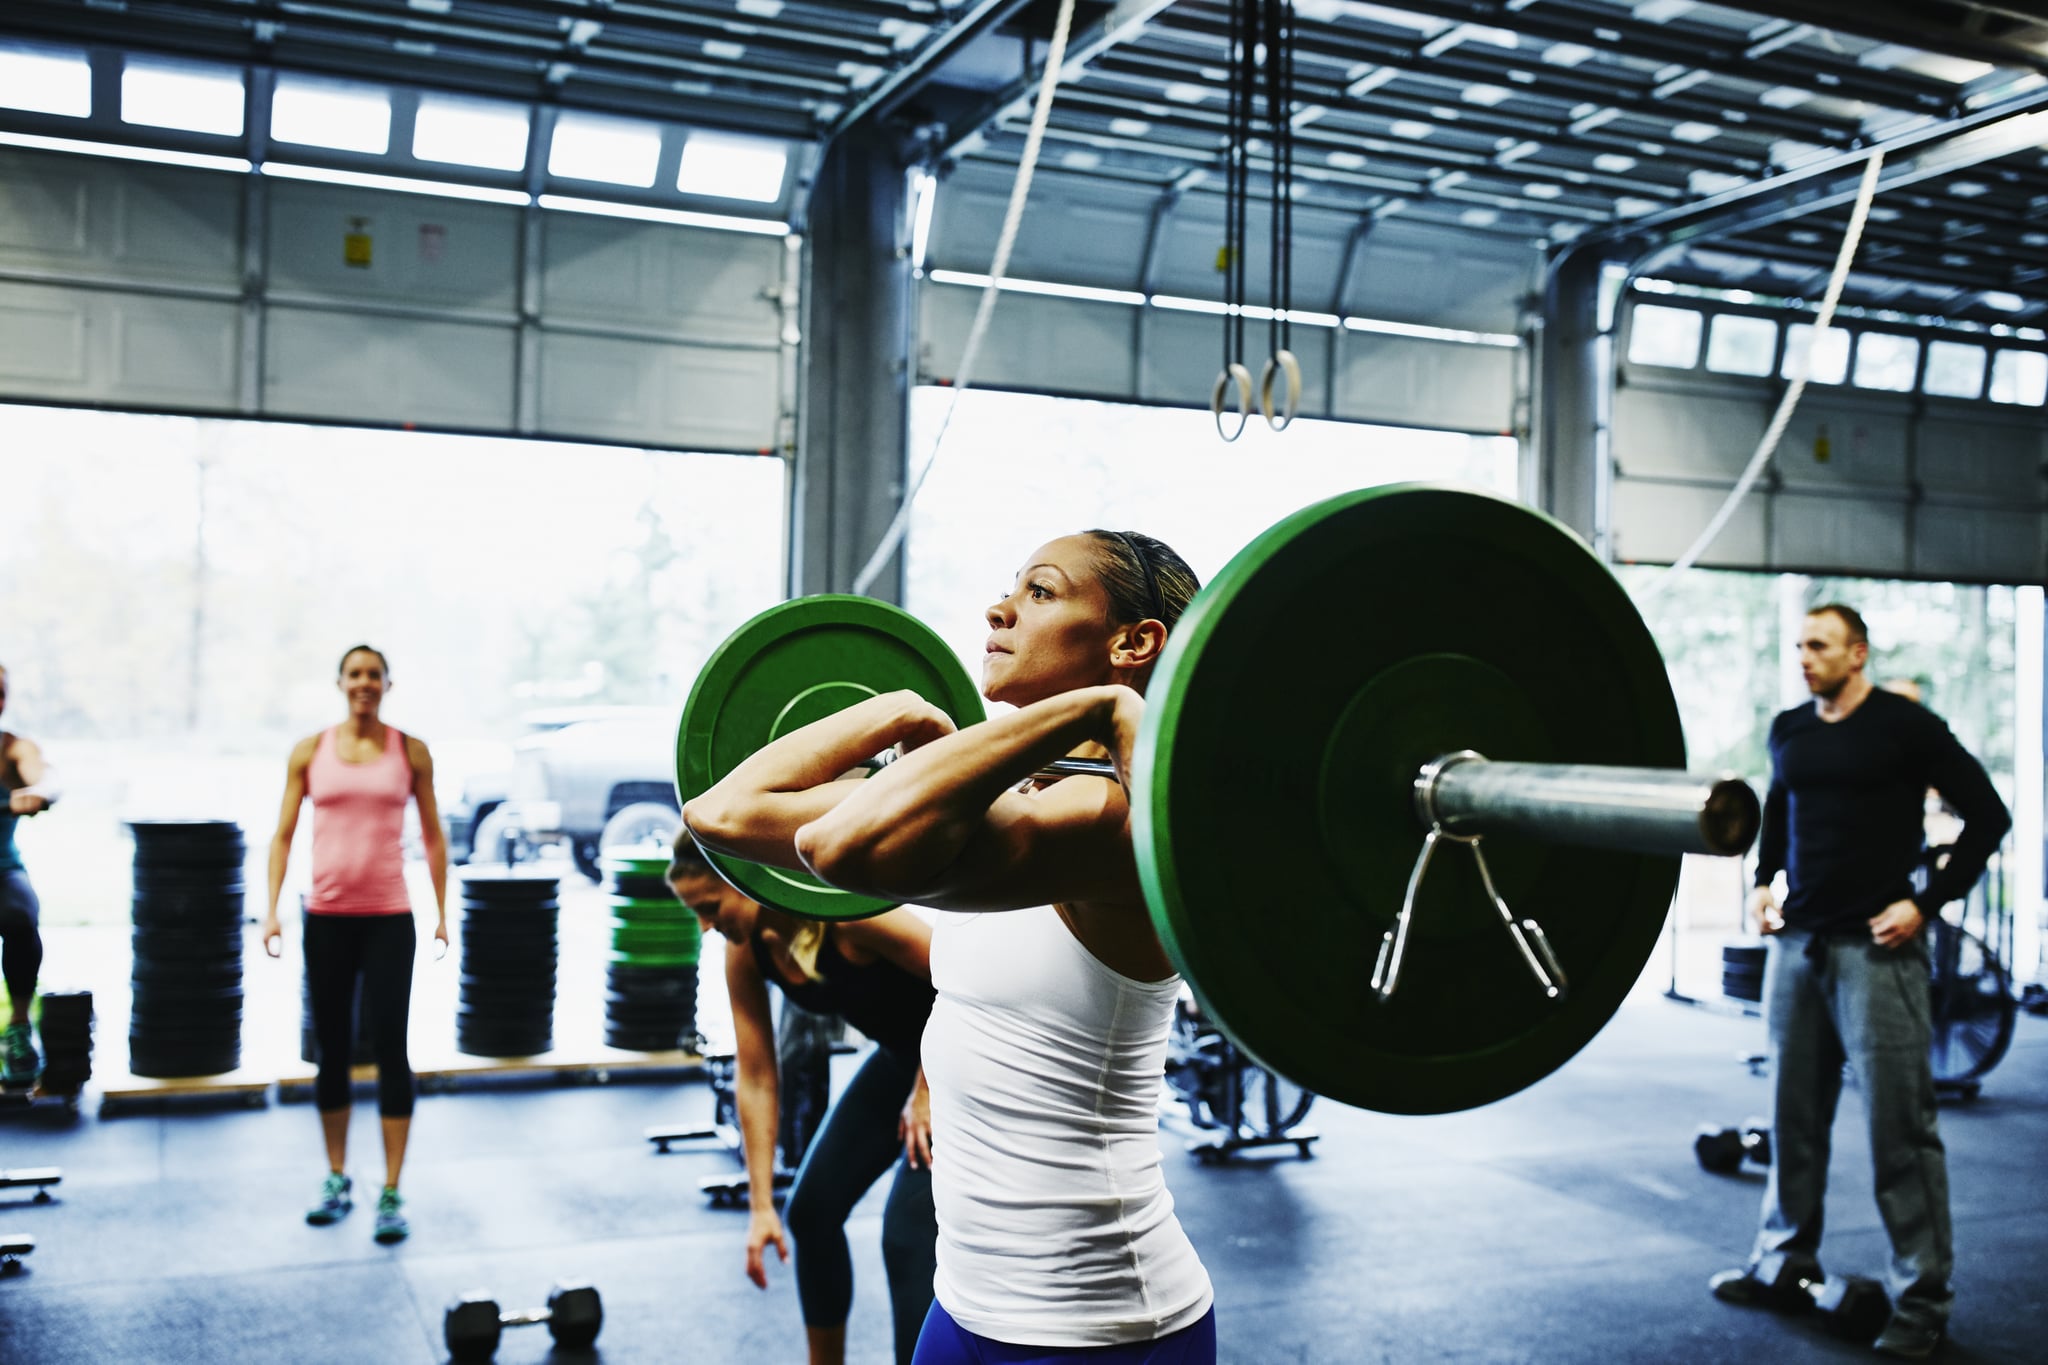 Does Lifting Weights Make Women Bulky?